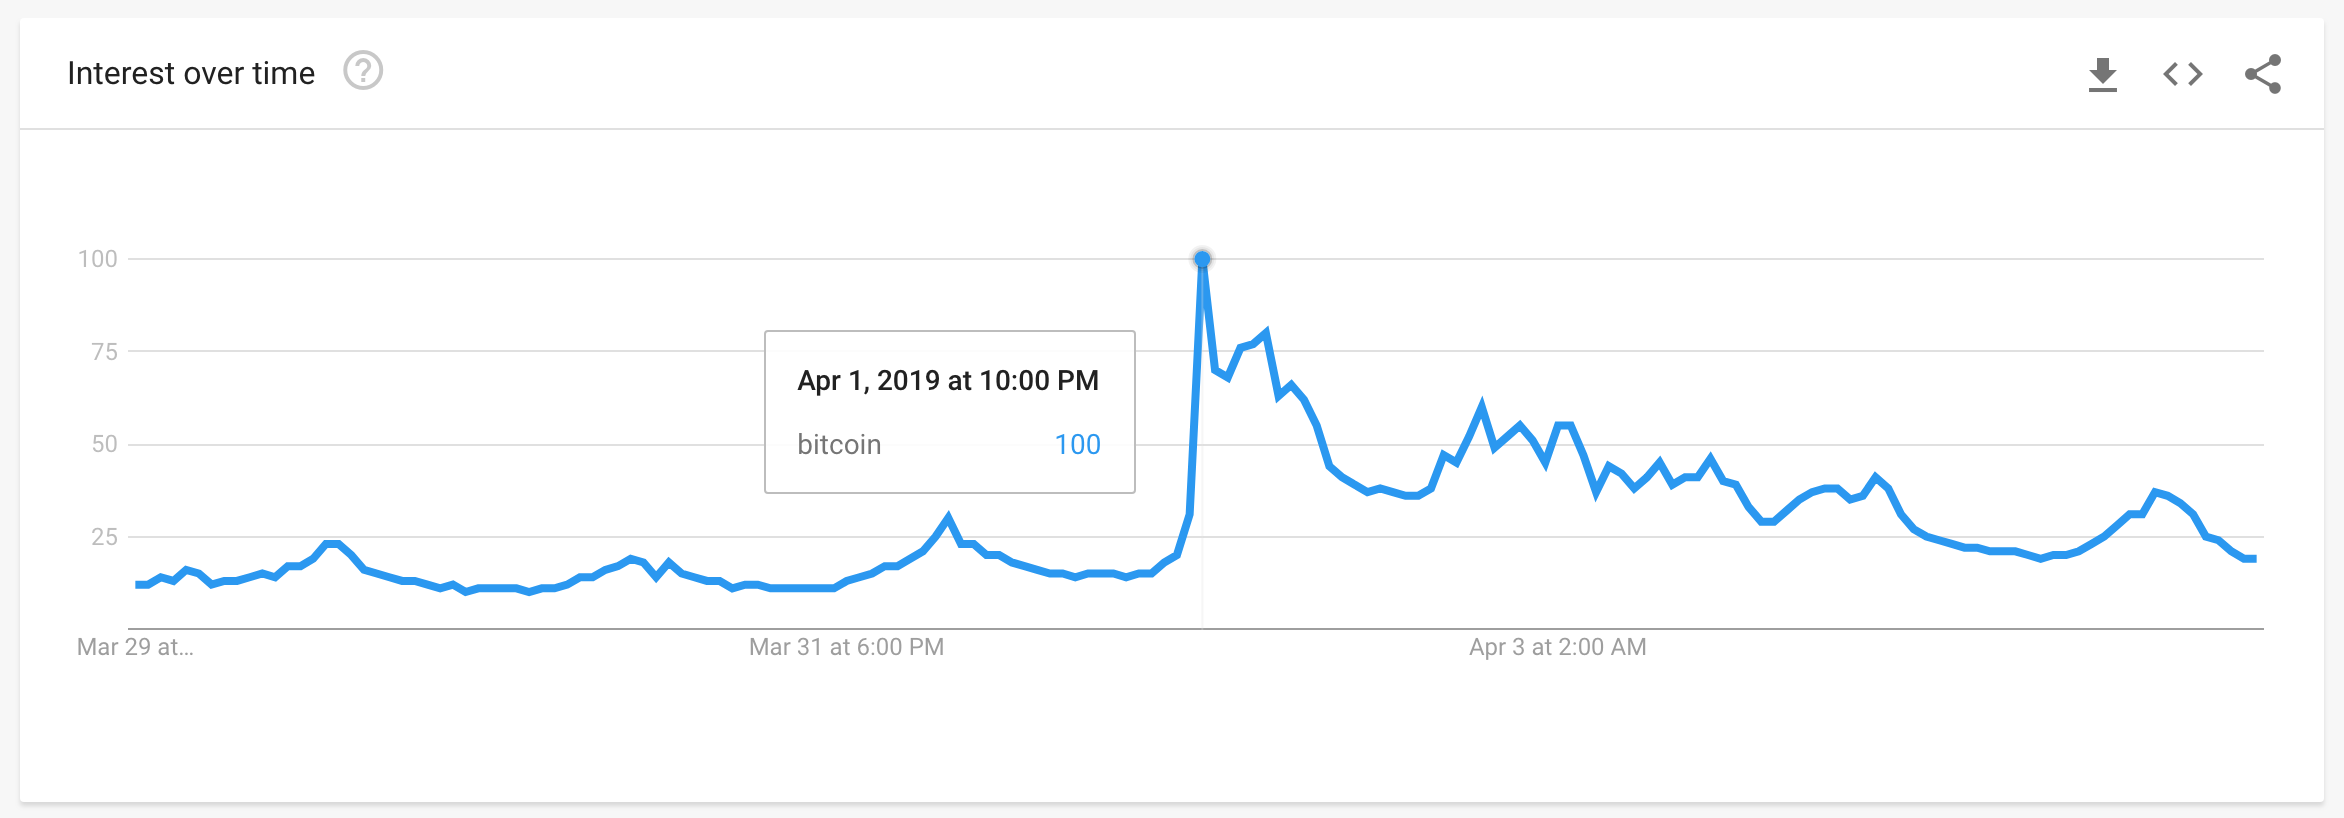 Google Trends Reveals Interest in Buying Bitcoin Grows After Price Increases; FOMO Sets In